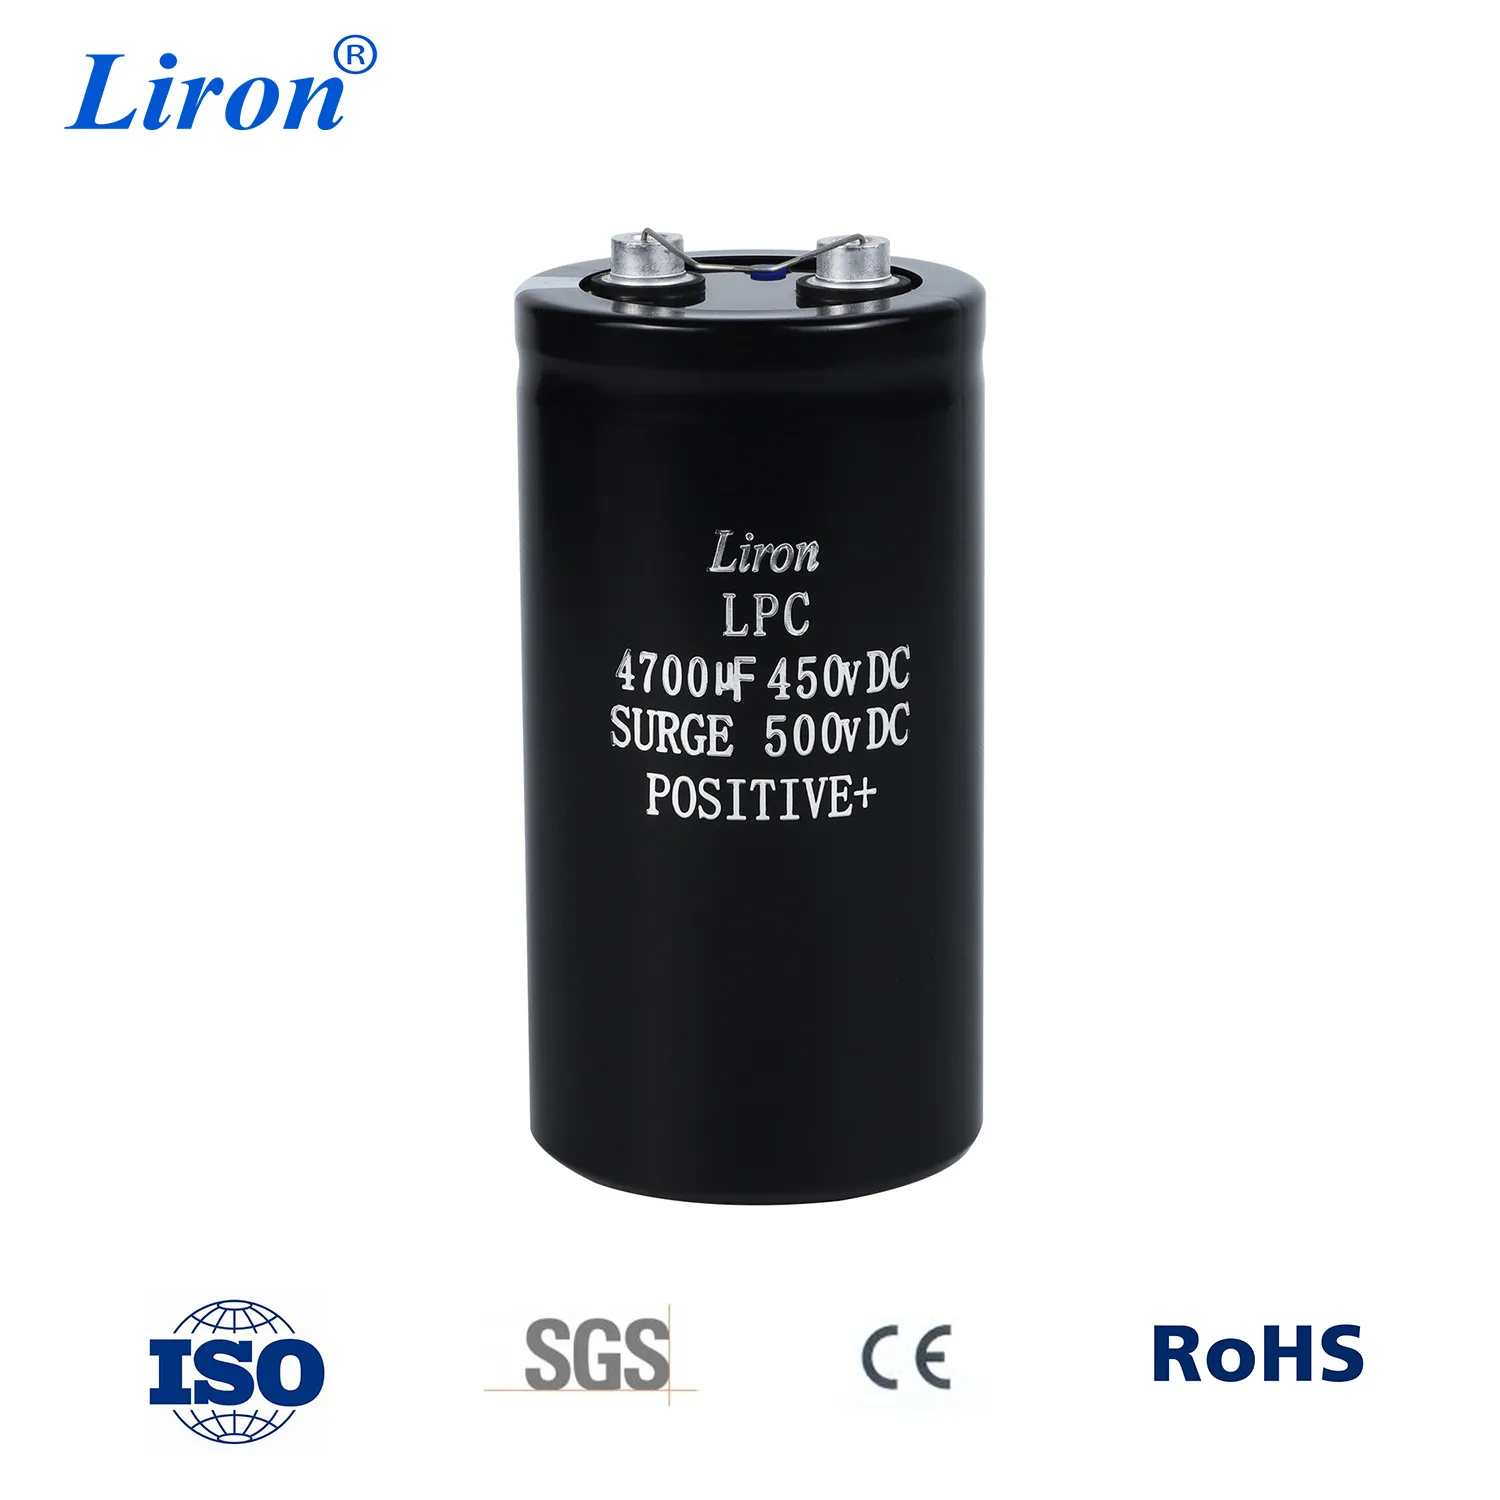 Are capacitors directional